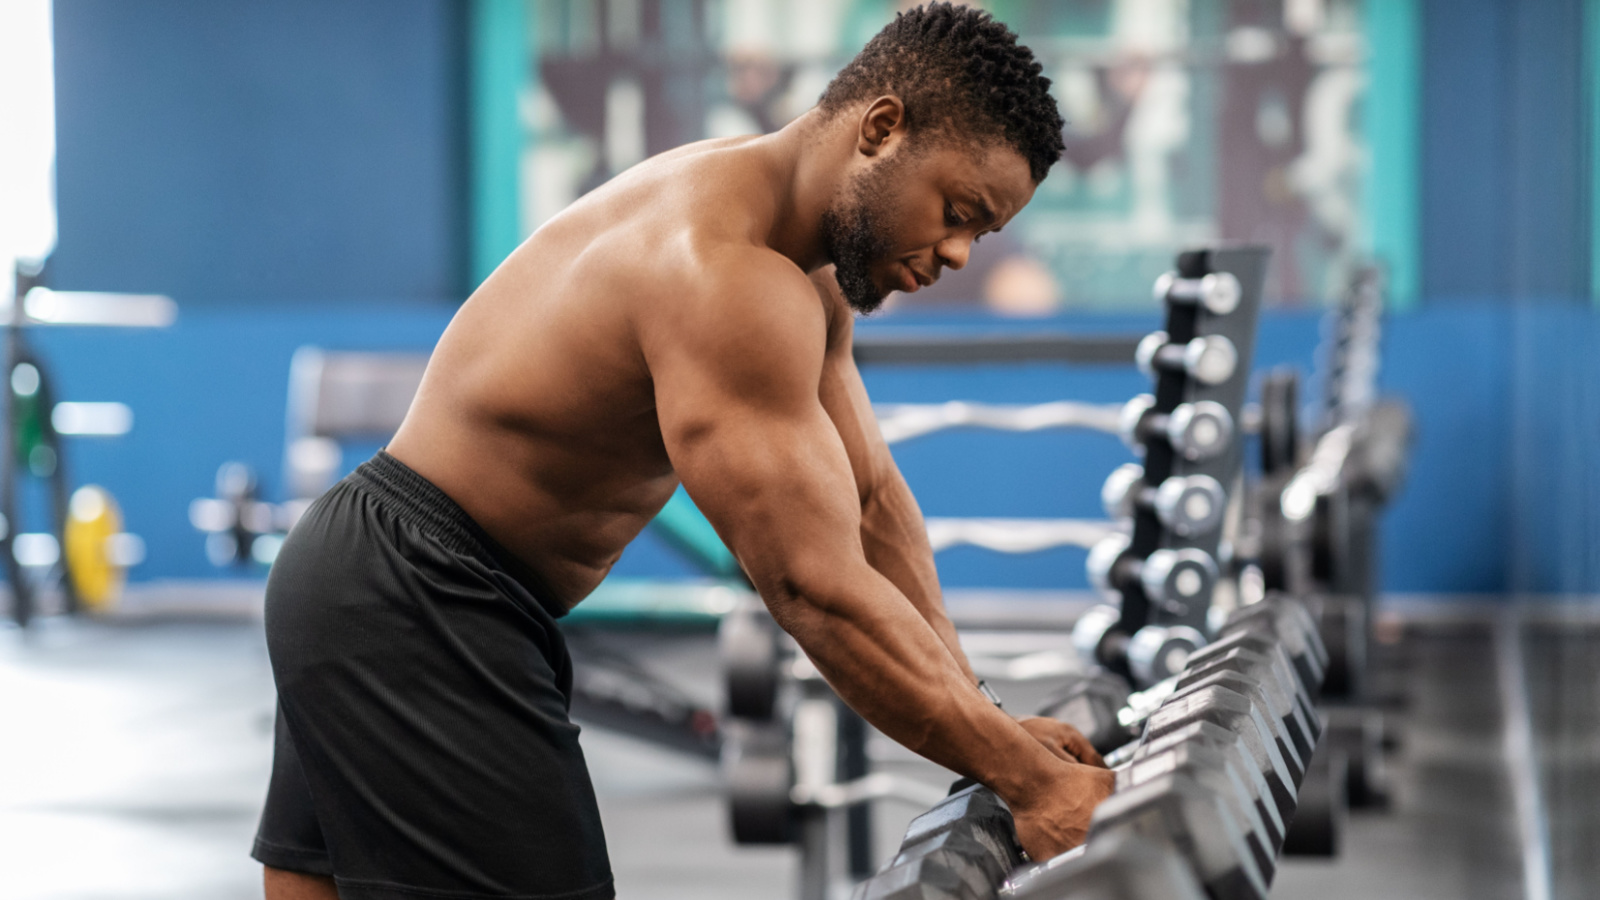 The Best Bodybuilding Workout for Each Body Part